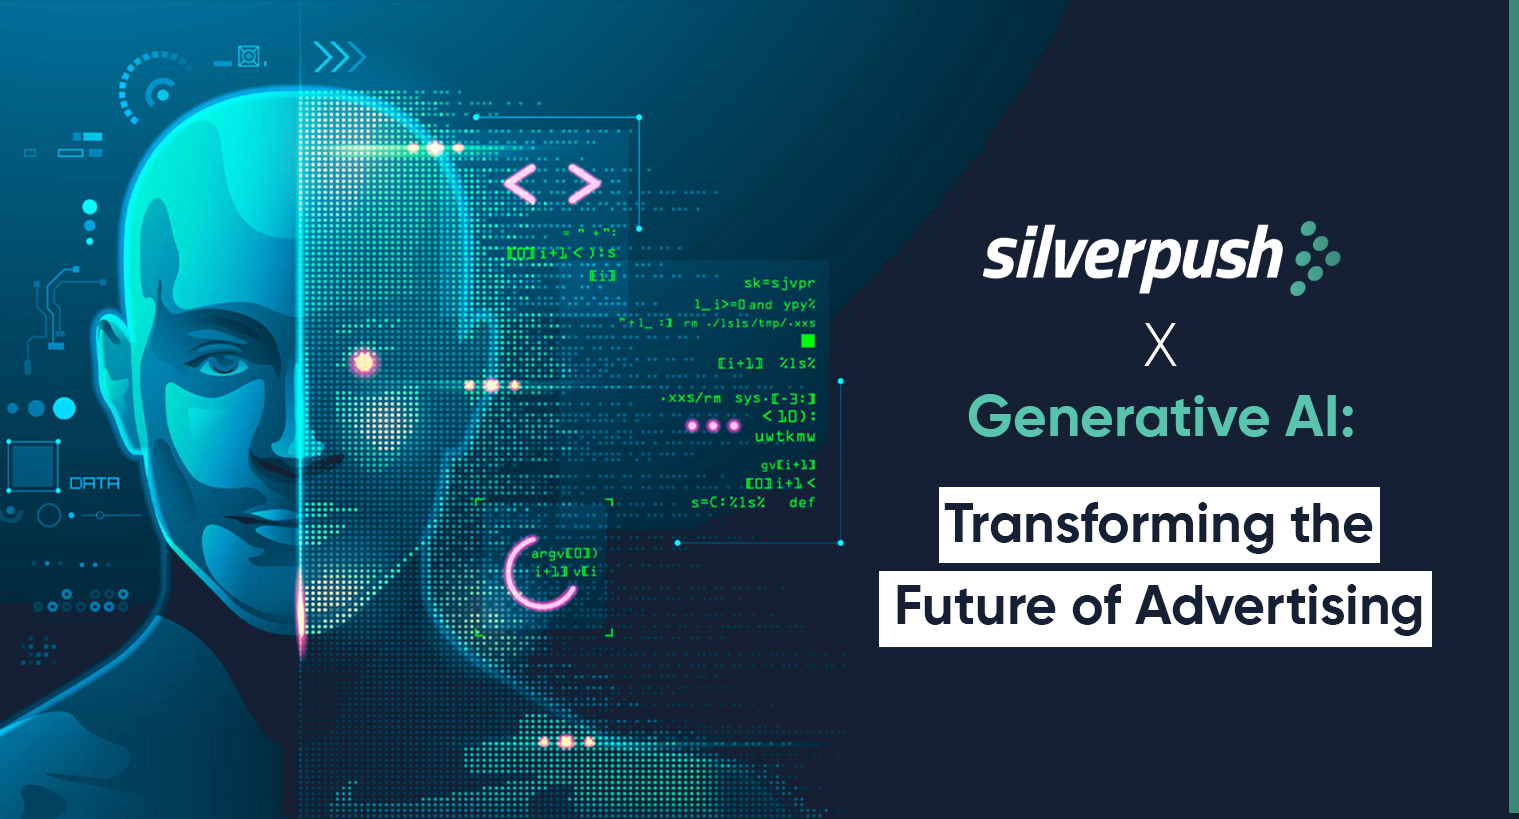 Silverpush builds the future of advertising with Gen AI